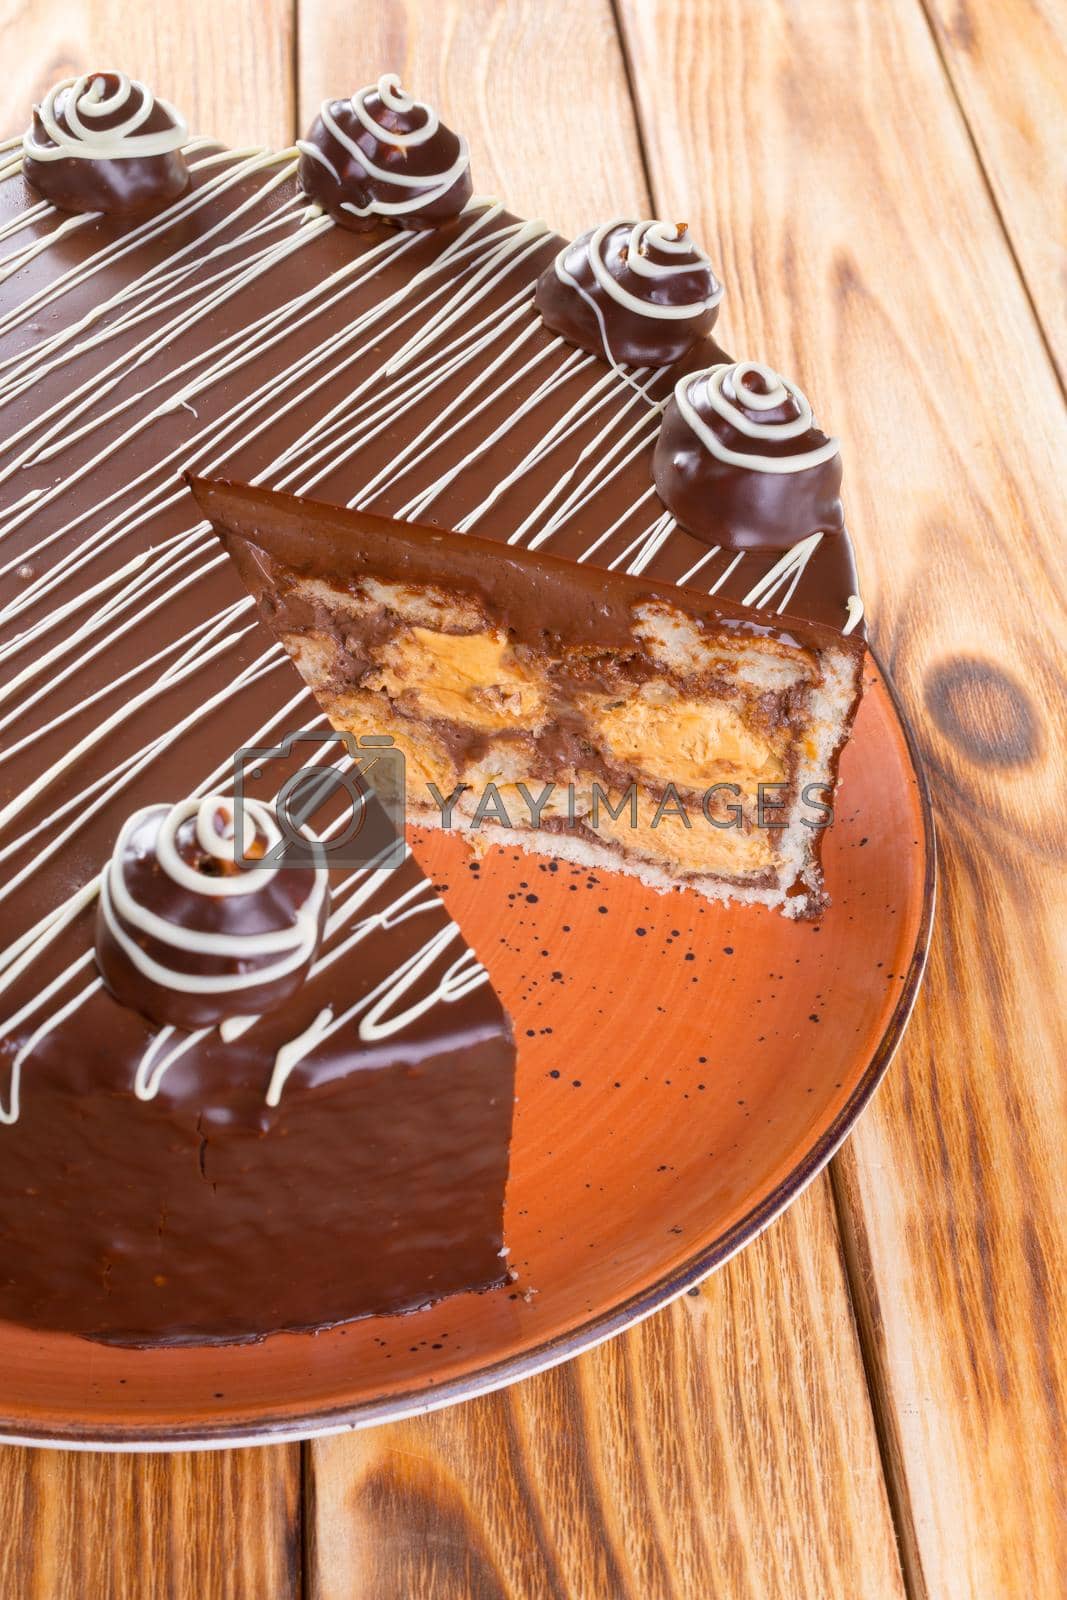 Royalty free image of Cut chocolate cake on plate on wooden table by Fabrikasimf